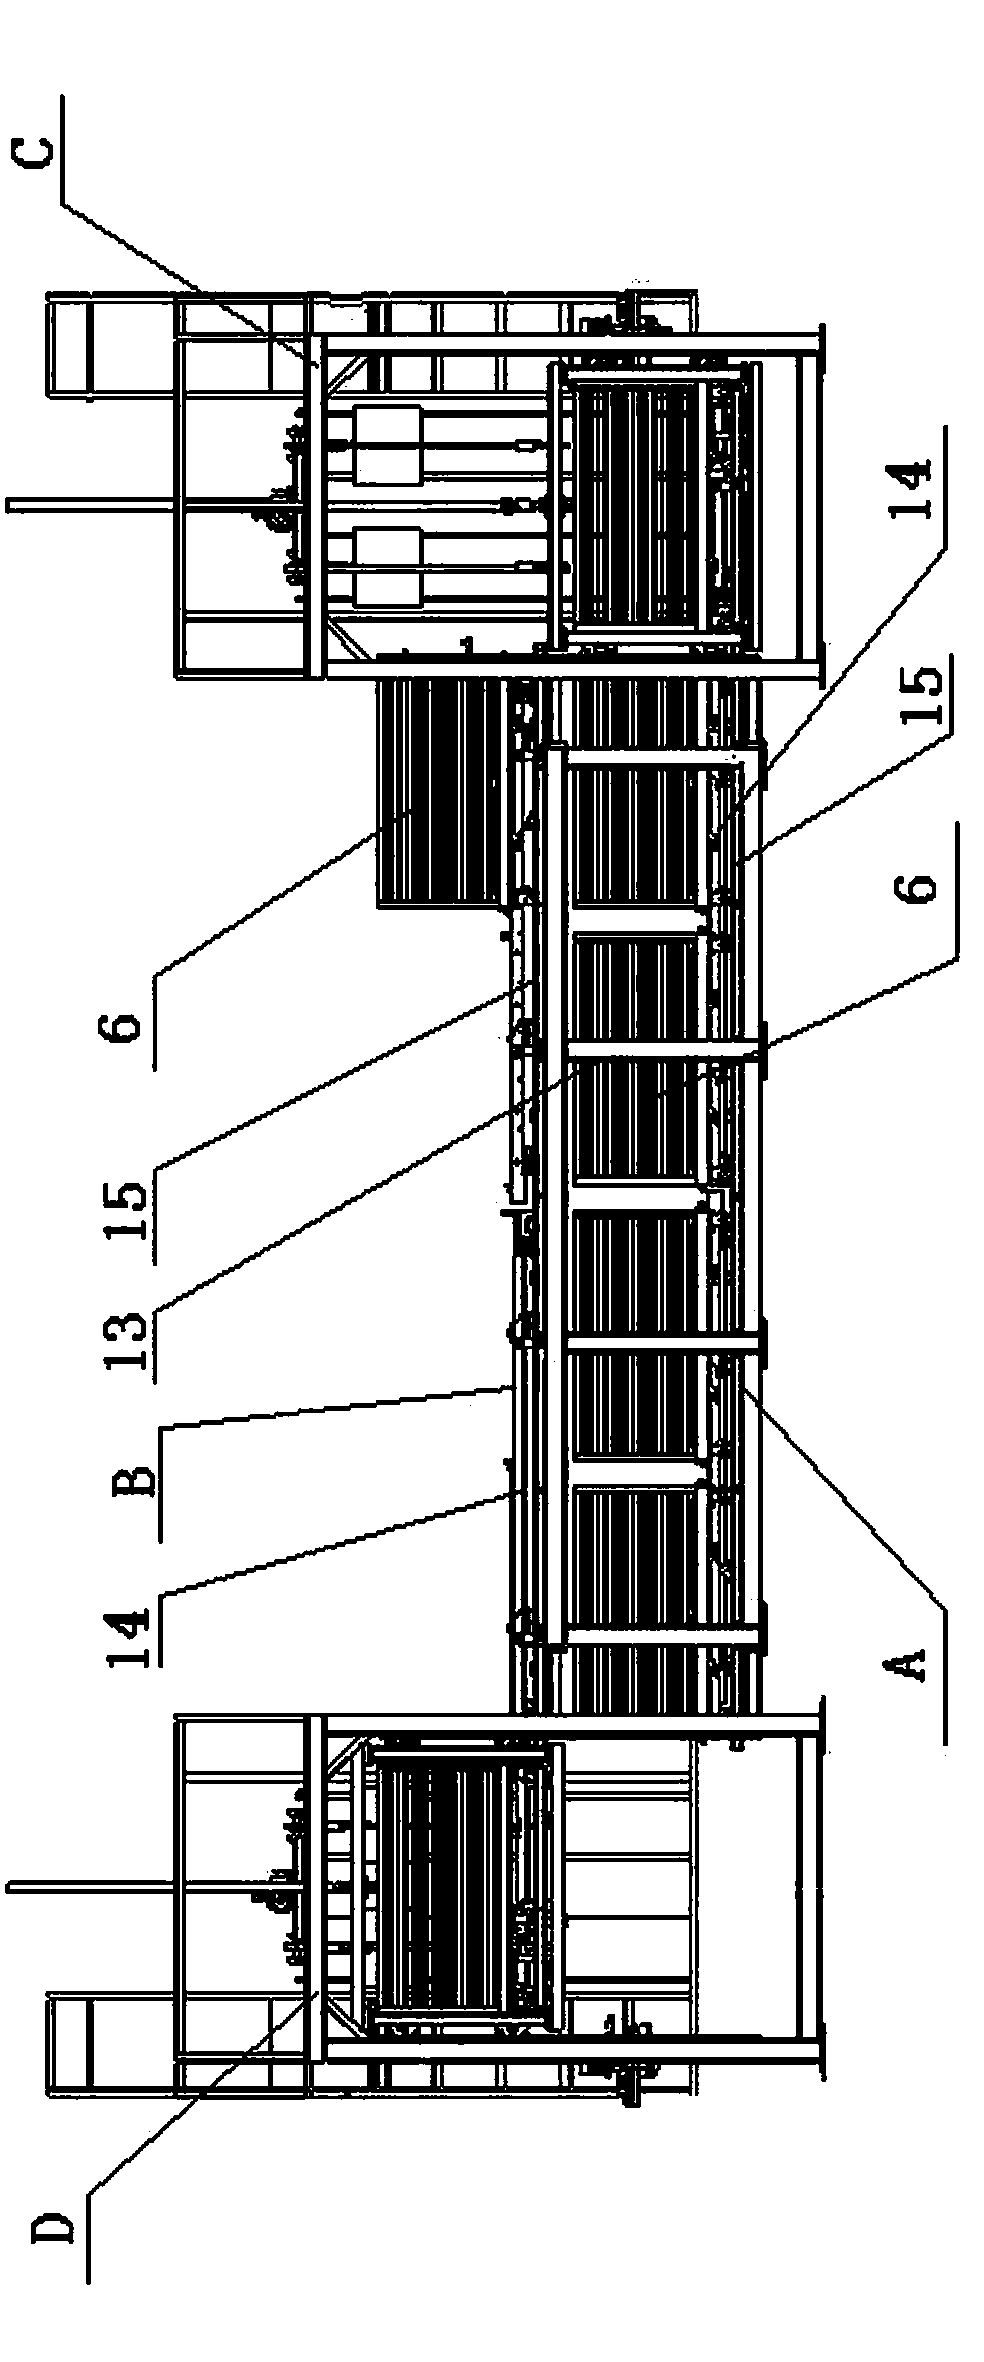 Large-sized green brick storing method and device used in front of kiln